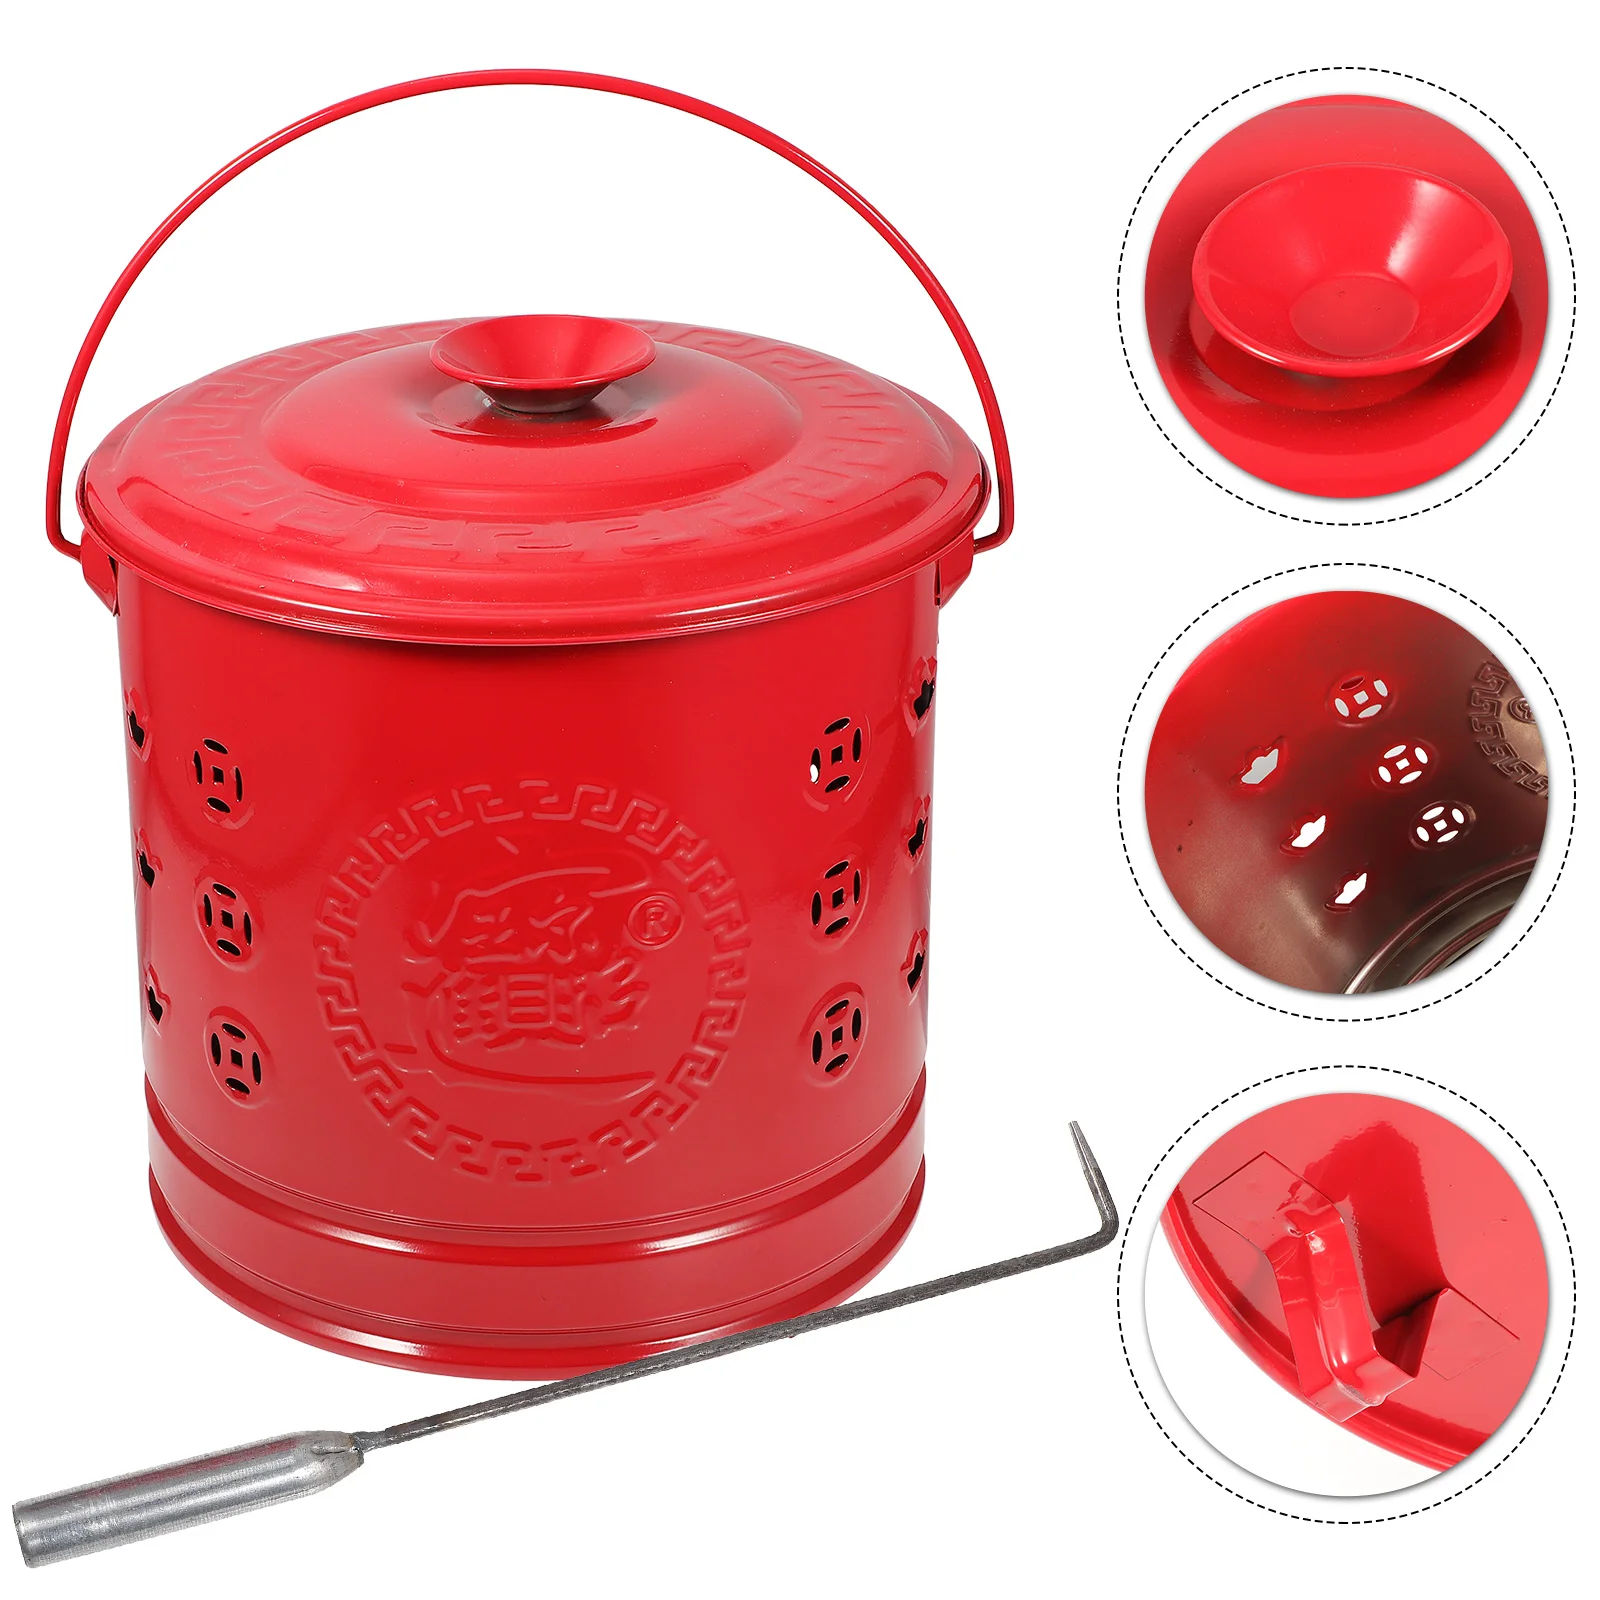 

Red Burning Barrel Treasure Inviting Chinese Sacrifices Bucket Small Enamel Stainless Steel Paper Money